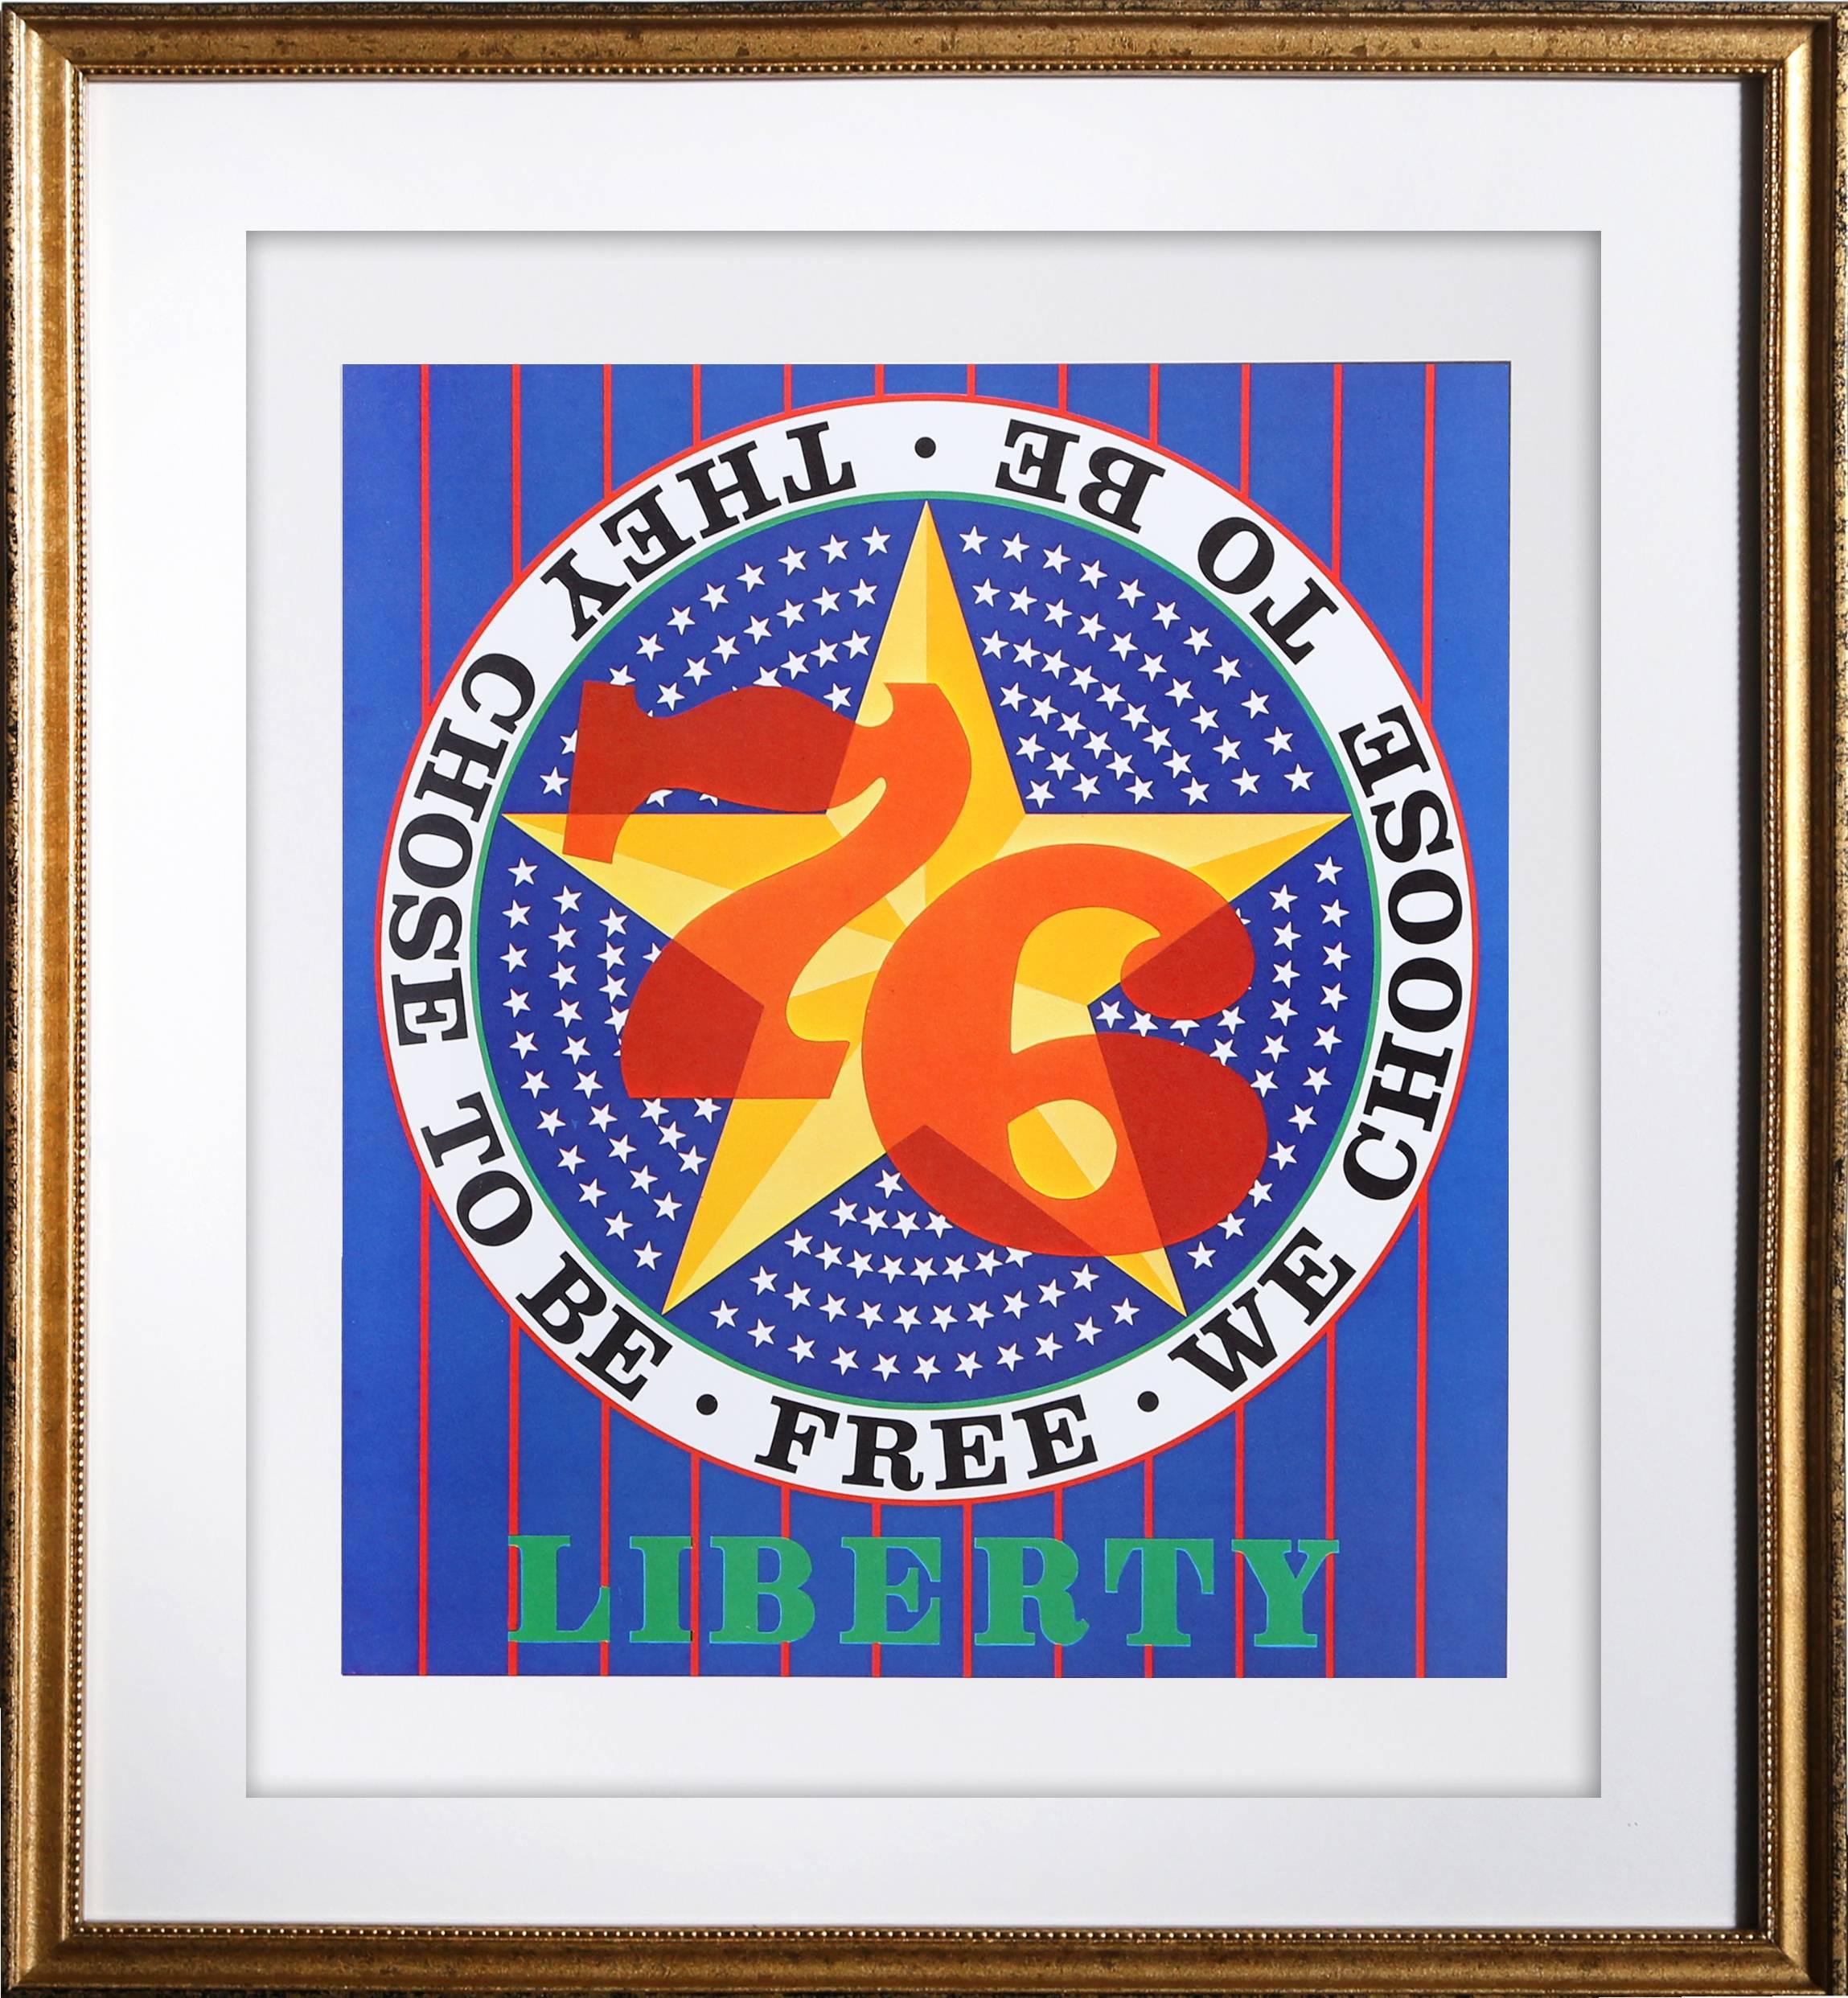 Artist:	Robert Indiana
Title:	Liberty from Kent-Bicentennial Portfolio Spirit of Independence
Year: 1975
Medium:	Offset Lithograph
Paper Size: 14 x 17 inches
Frame: 19 x 18 inches

From the Spirit of Independence poster Portfolio, published in 1975